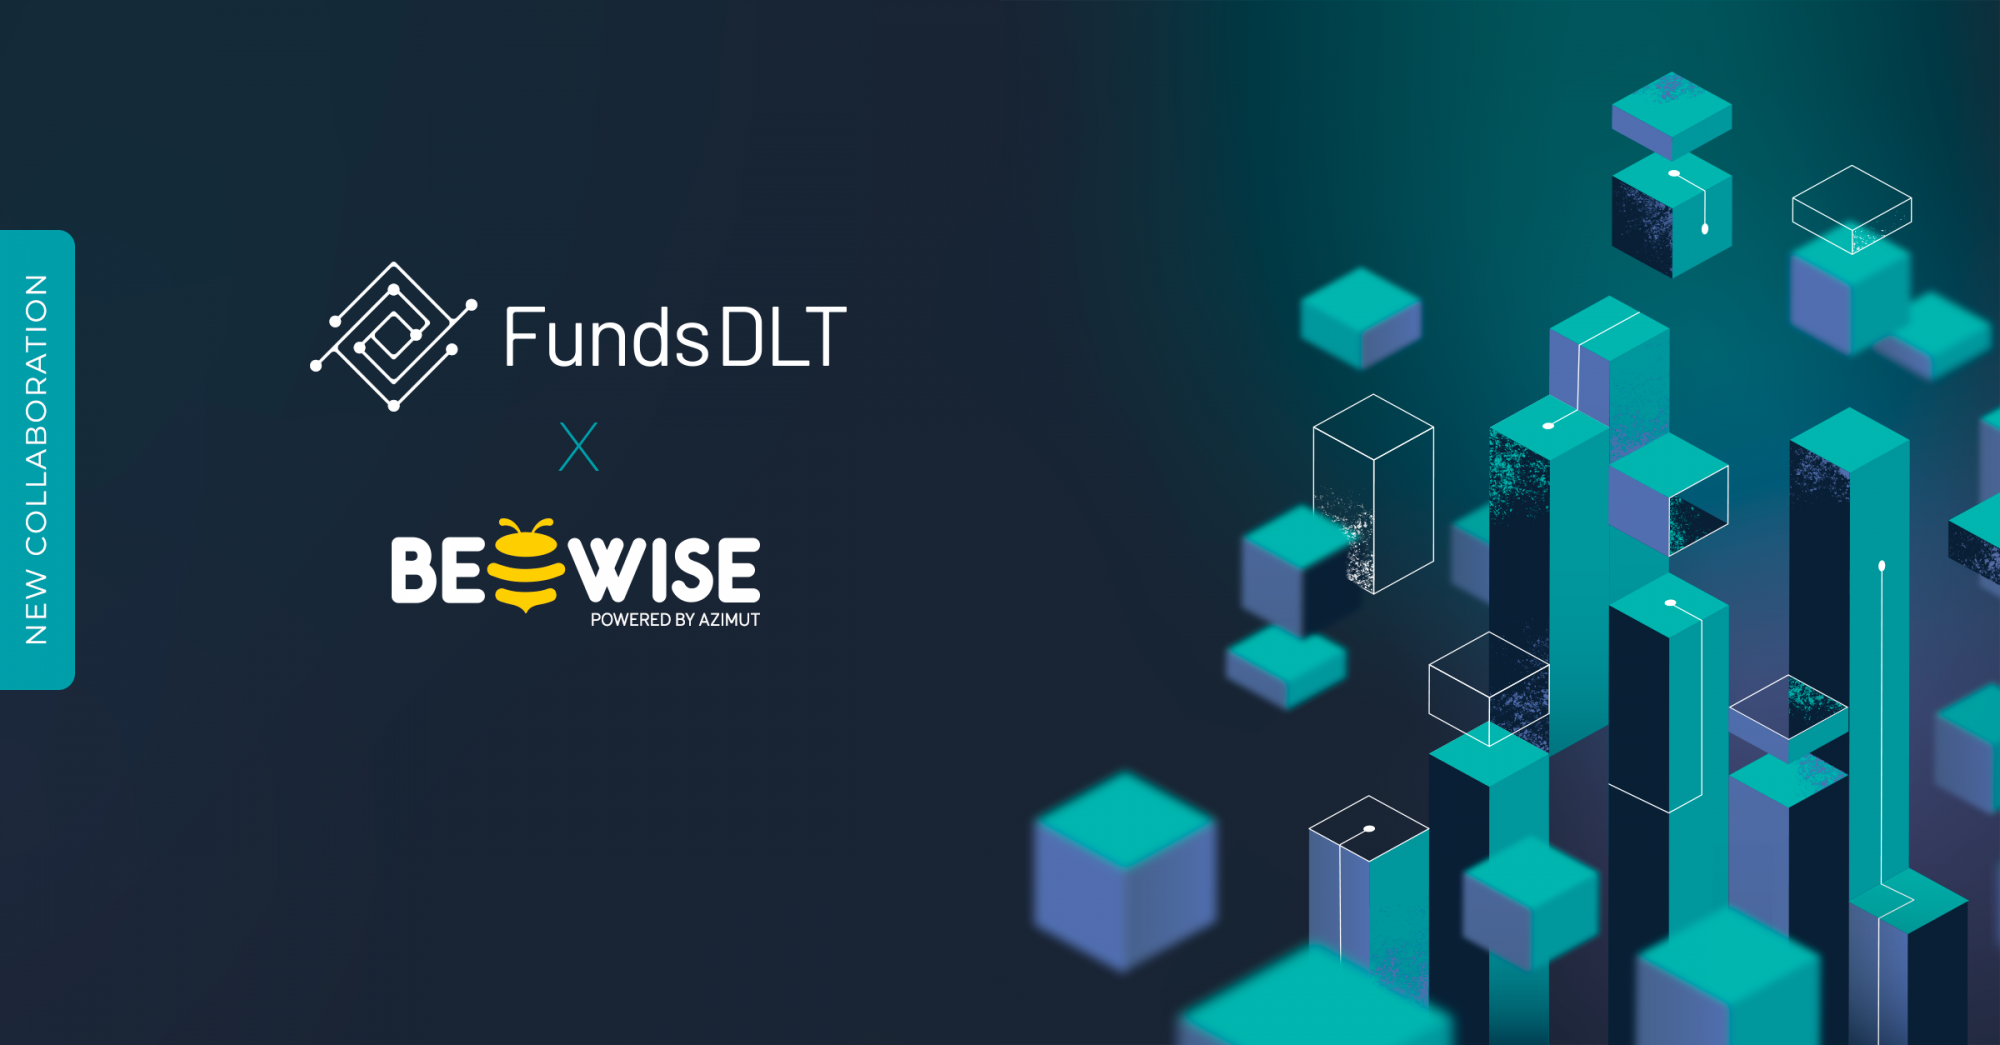 Beewise by Azimut Investment: a next-gen D2C fund distribution solution, powered by FundsDLT